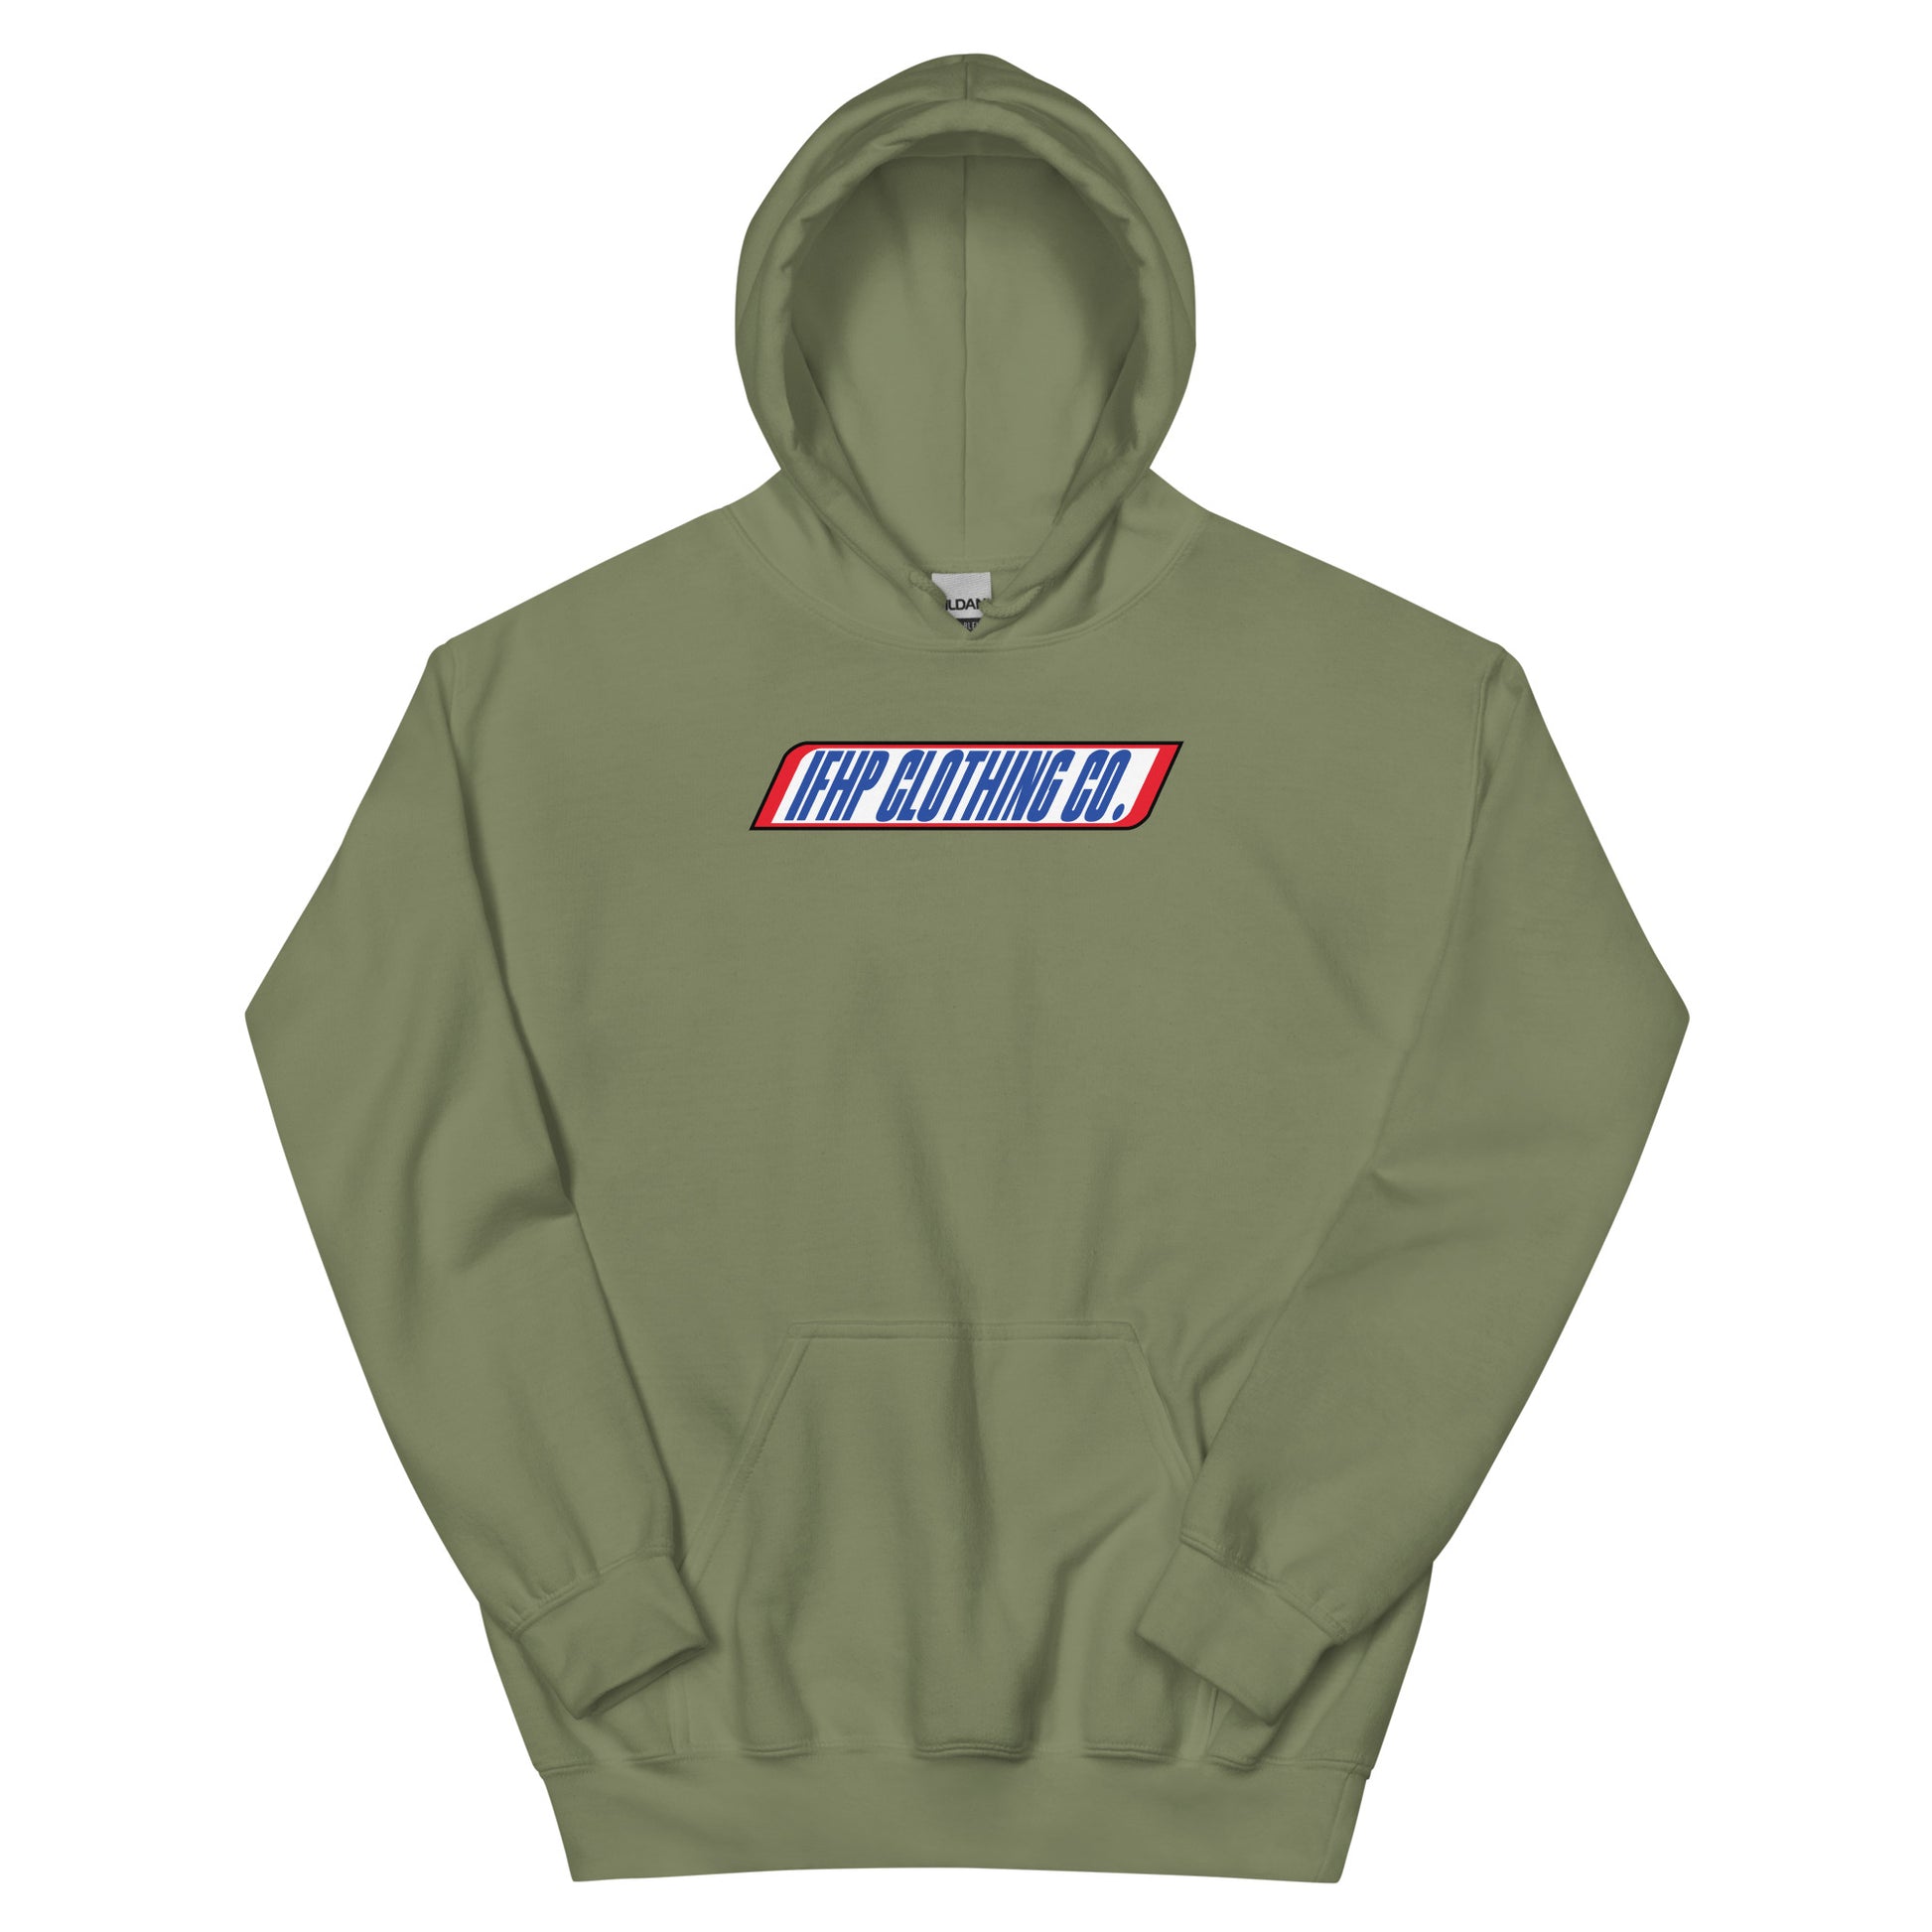 Who Doesn't Like Candy? Hoodie Military Green Front